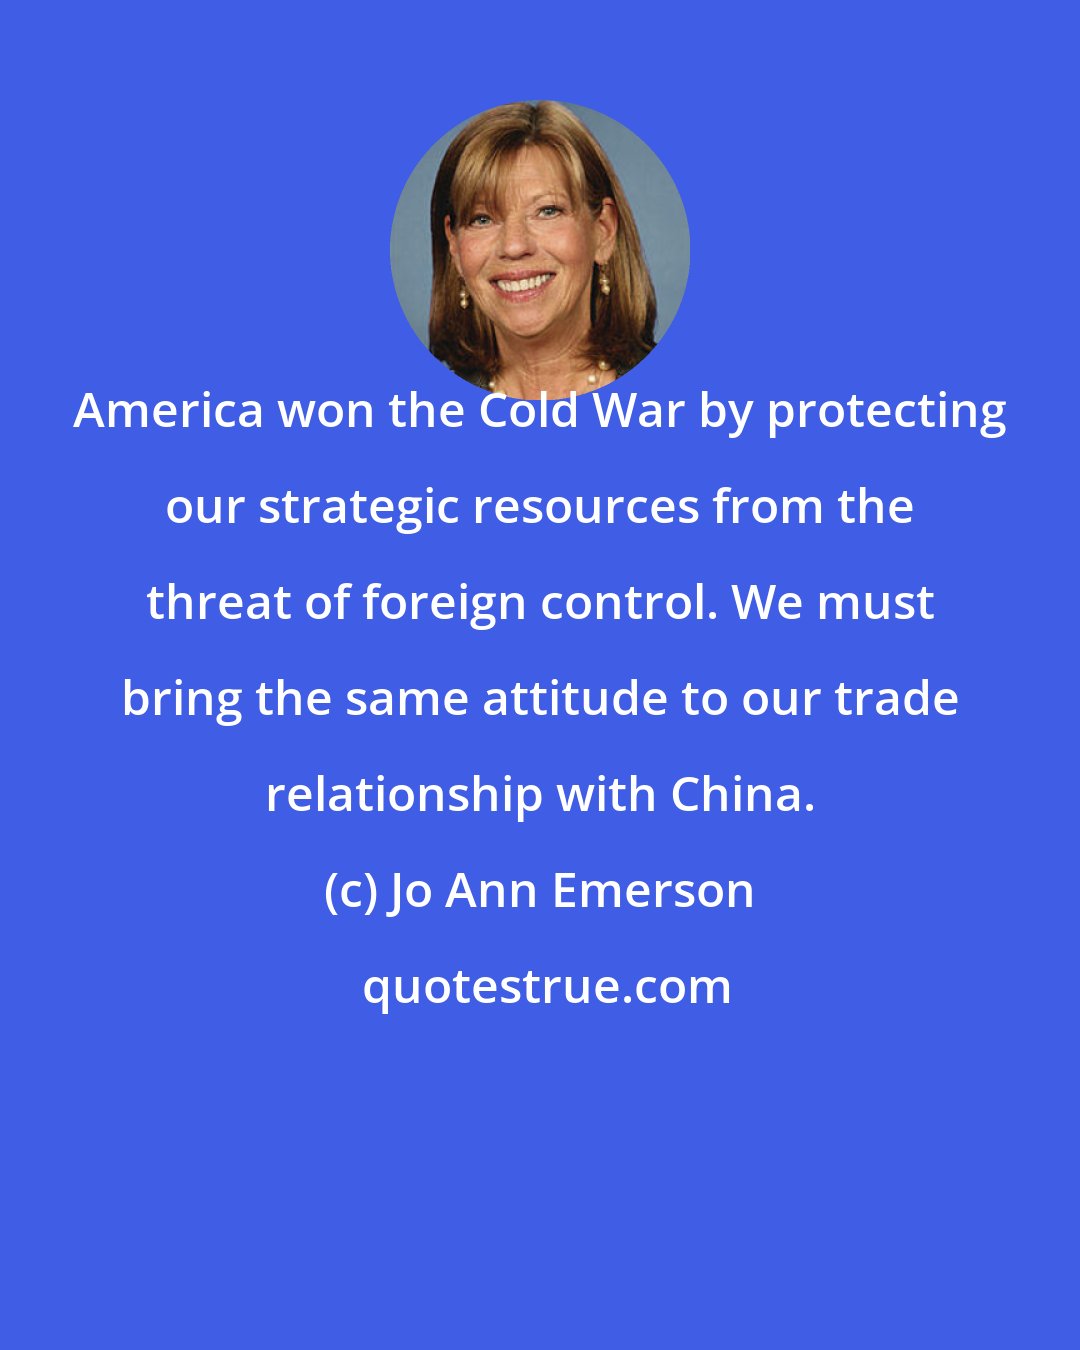 Jo Ann Emerson: America won the Cold War by protecting our strategic resources from the threat of foreign control. We must bring the same attitude to our trade relationship with China.